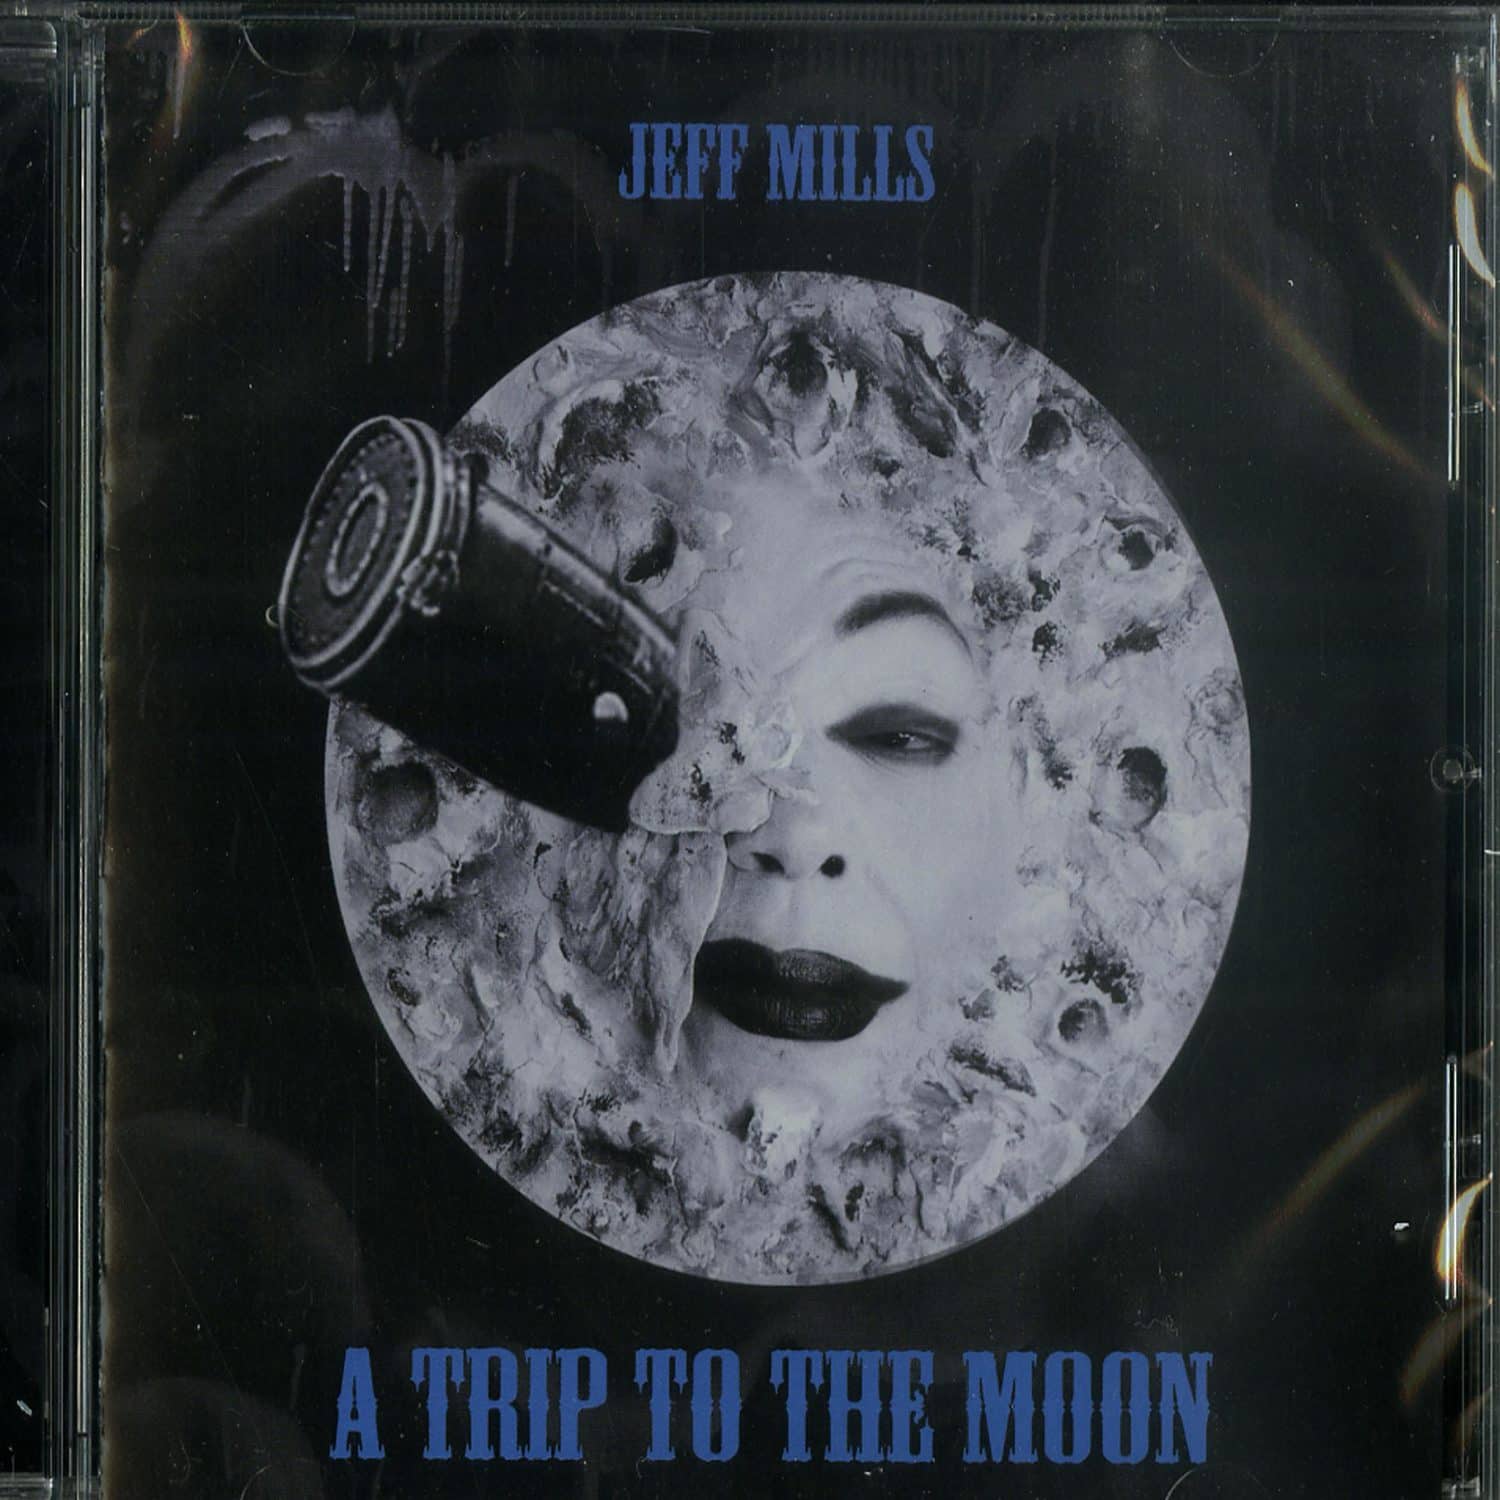 Jeff Mills - A TRIP TO THE MOON 